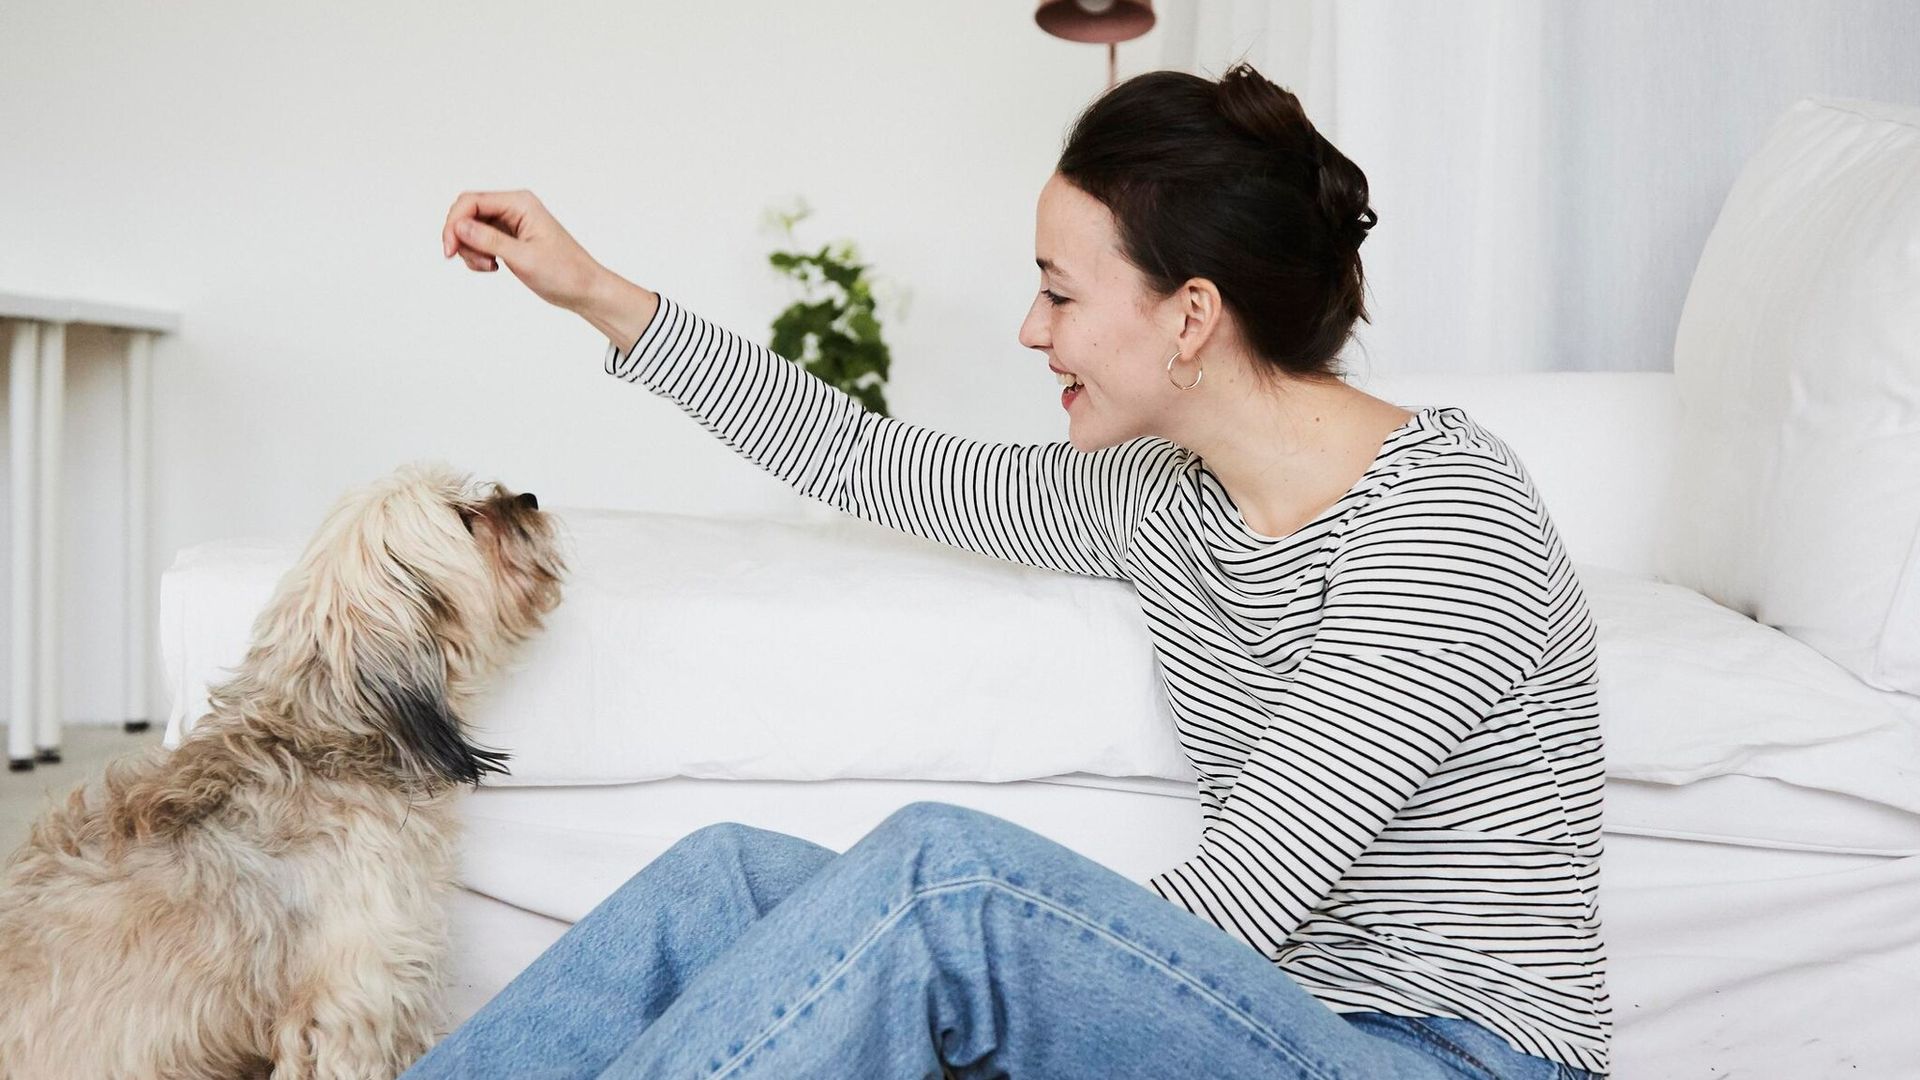 portrait of a young adult woman communicating with her dog